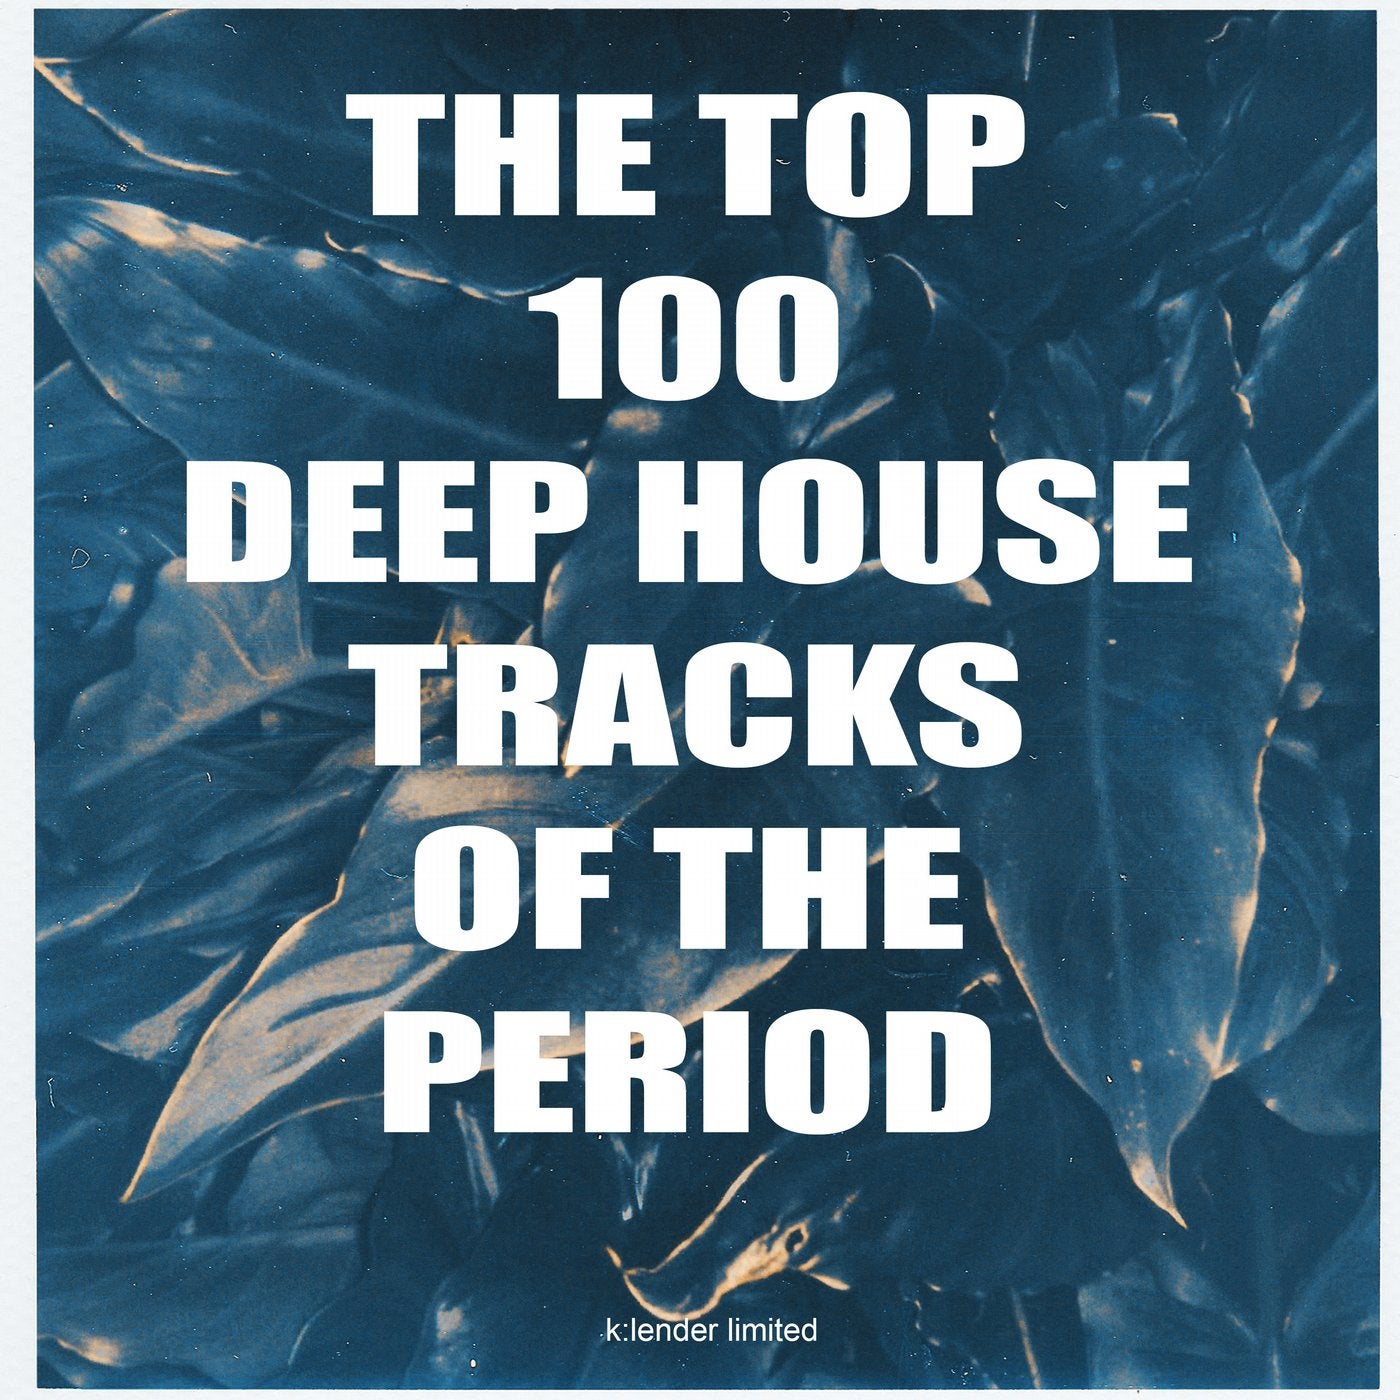 The Top 100 Deep House Tracks of the Period